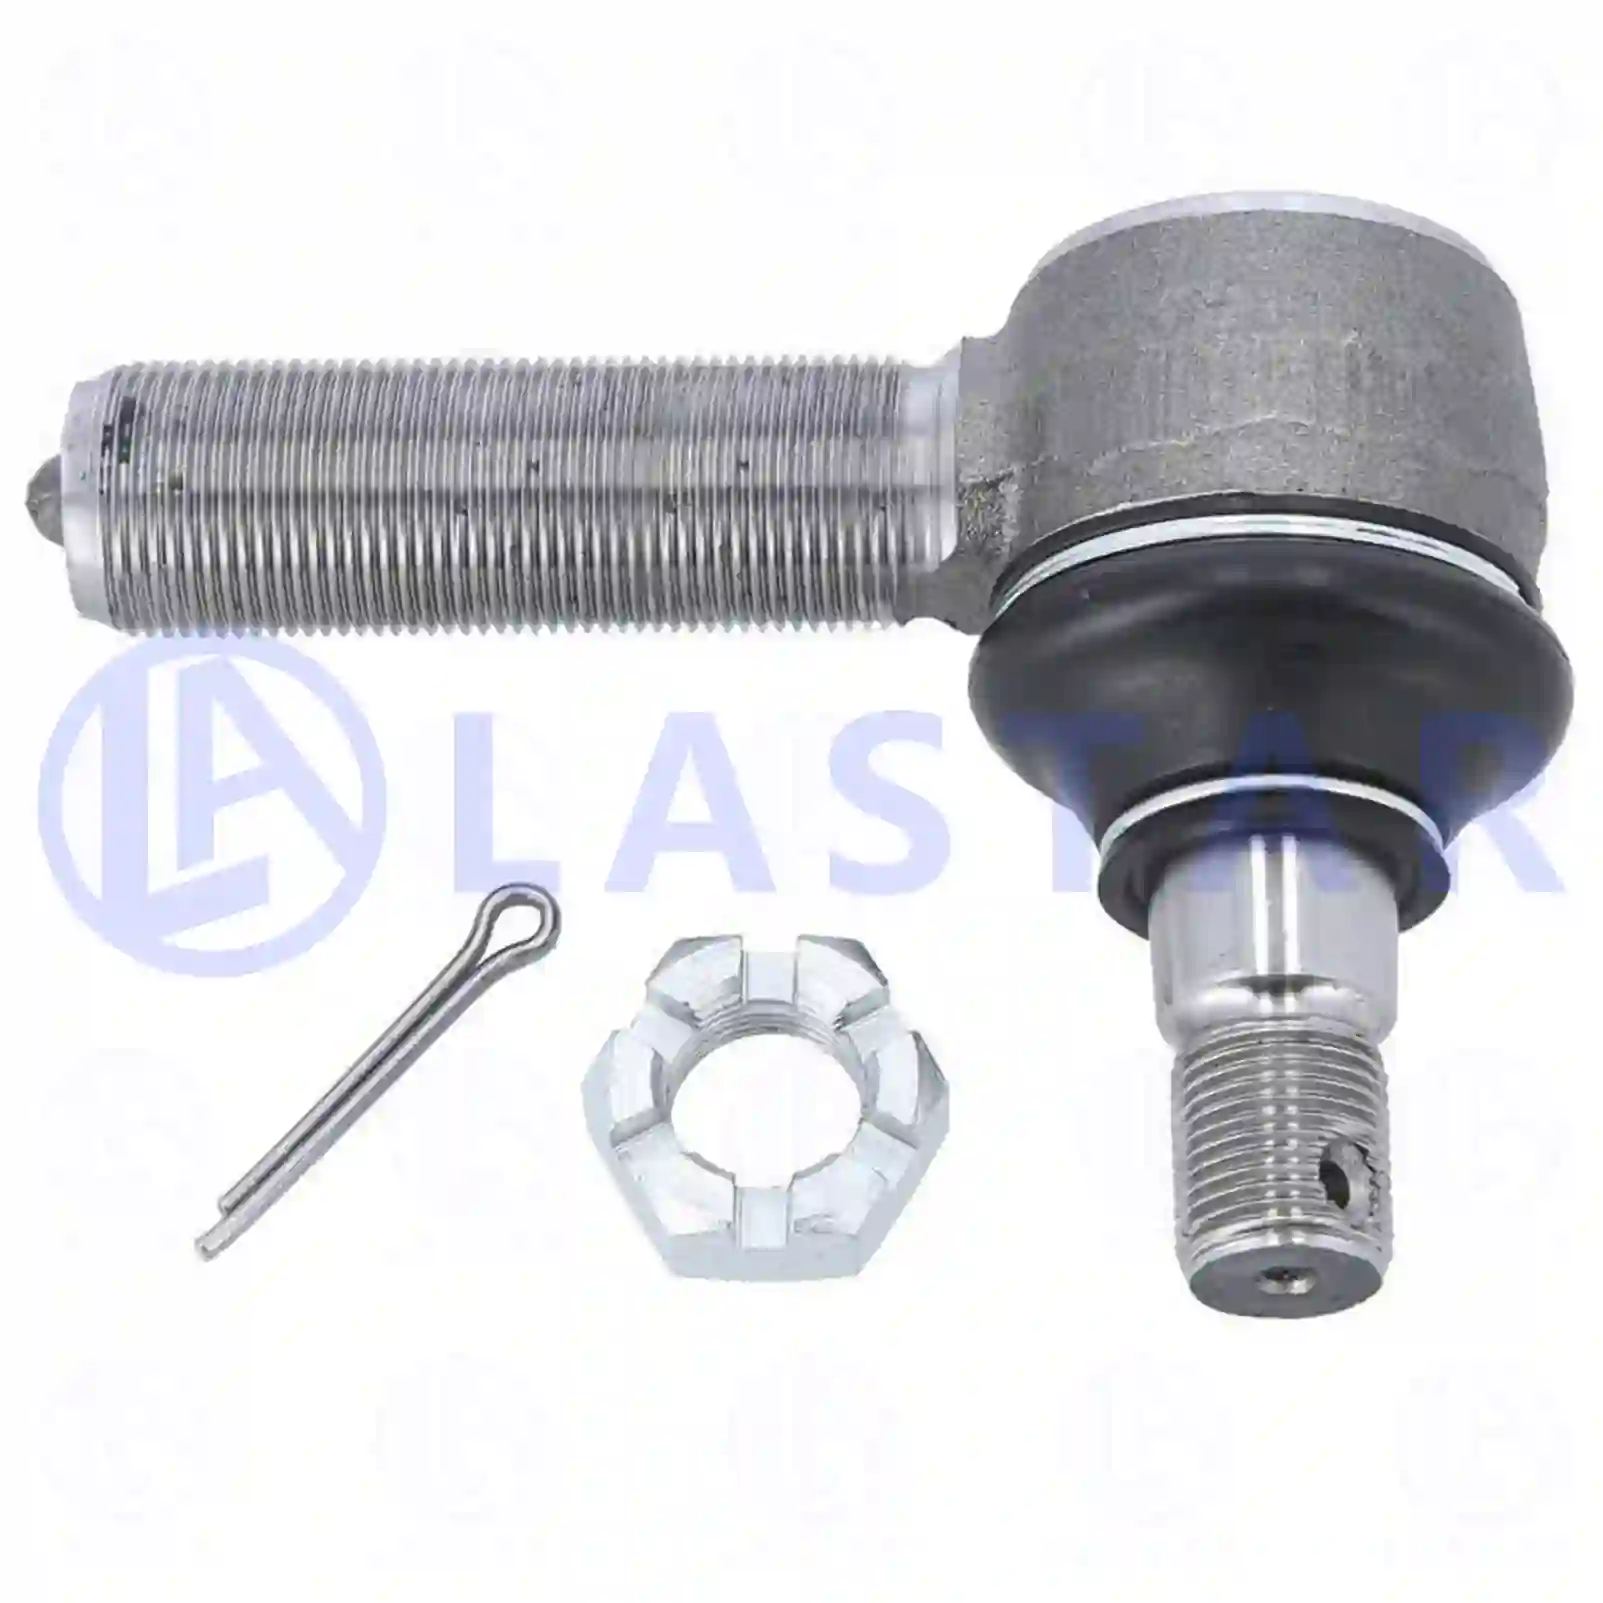 Ball joint, left hand thread, 77705924, 07984276, 08558524, 7984276, 8558524, 93194627, 0003301335, 0003307635, 0003309835, 0013300035, 0023301435, 120324002, 1696920, ZG40349-0008 ||  77705924 Lastar Spare Part | Truck Spare Parts, Auotomotive Spare Parts Ball joint, left hand thread, 77705924, 07984276, 08558524, 7984276, 8558524, 93194627, 0003301335, 0003307635, 0003309835, 0013300035, 0023301435, 120324002, 1696920, ZG40349-0008 ||  77705924 Lastar Spare Part | Truck Spare Parts, Auotomotive Spare Parts